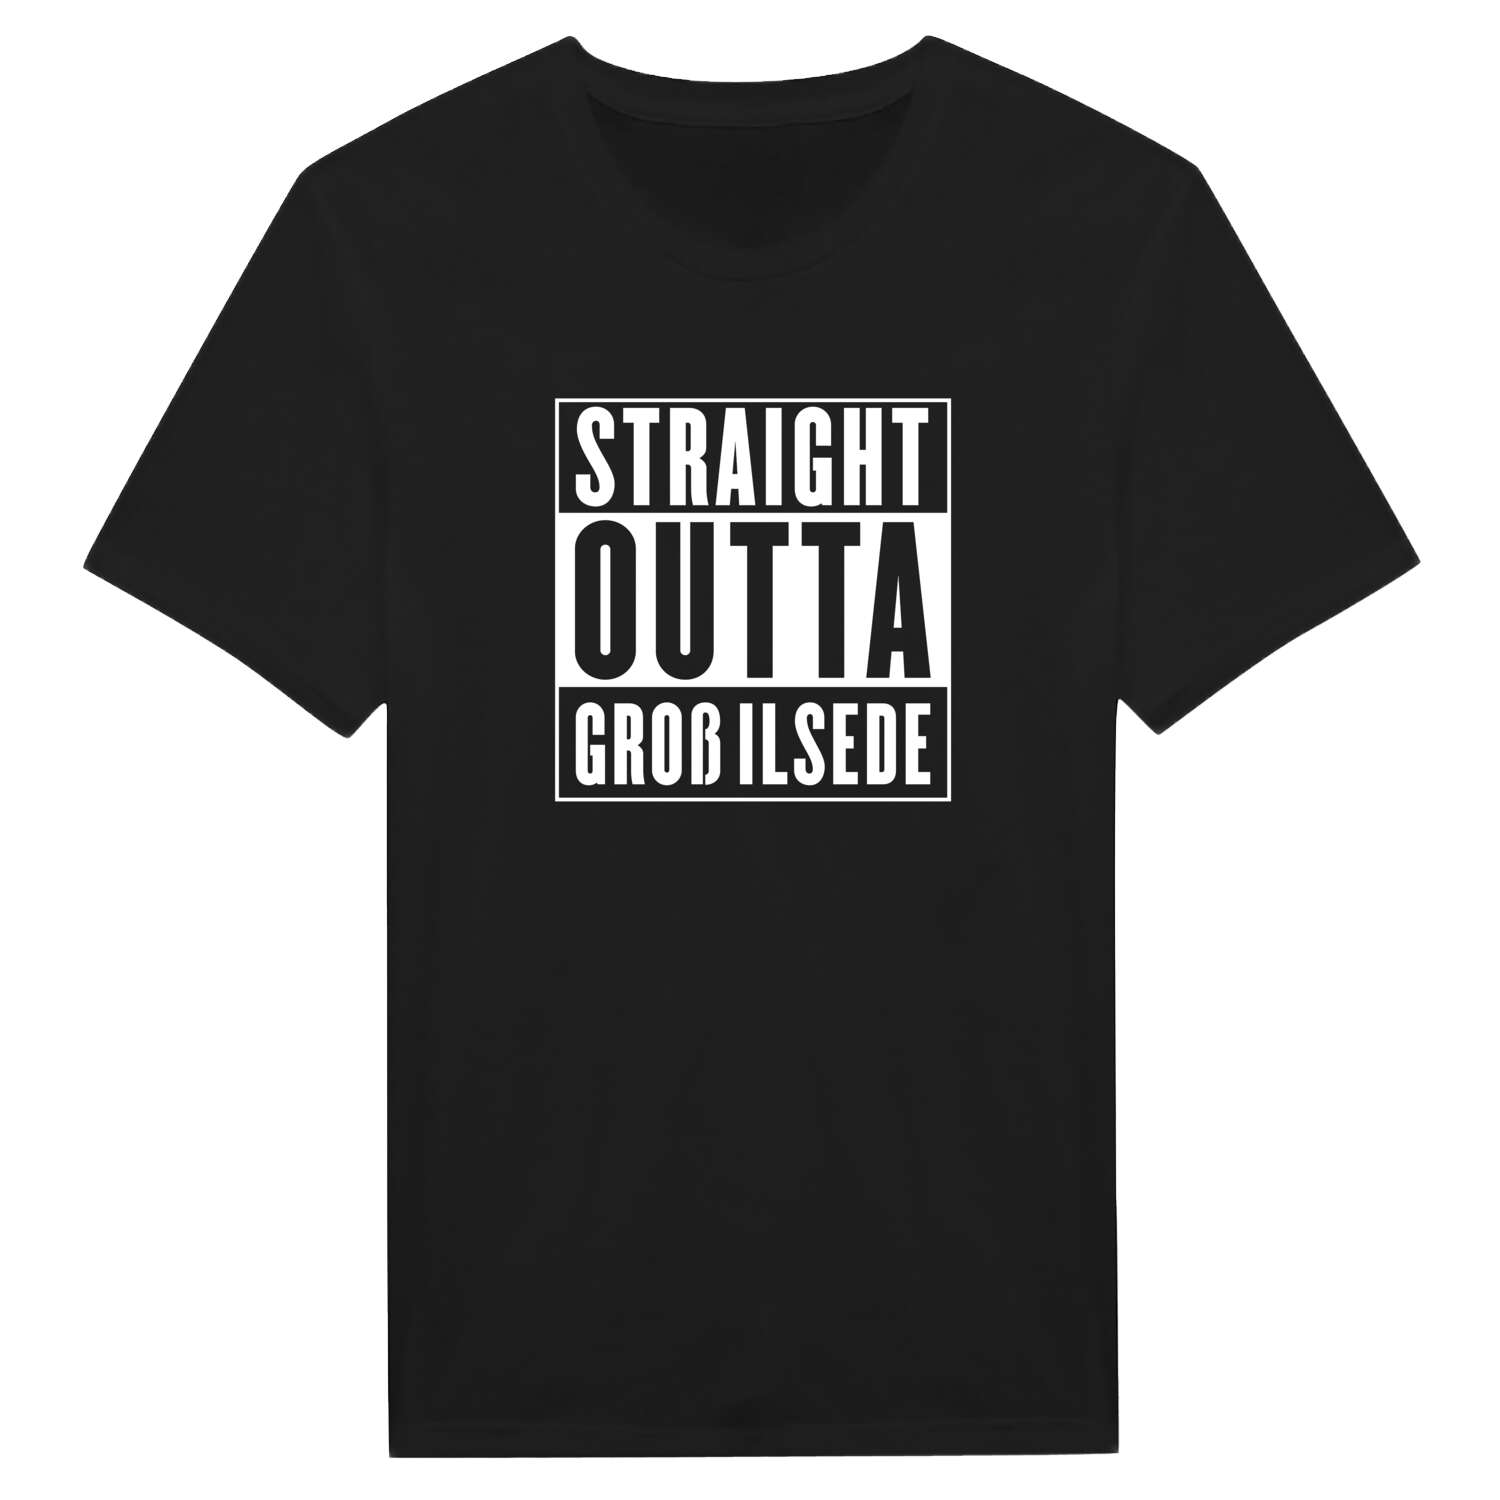 Groß Ilsede T-Shirt »Straight Outta«